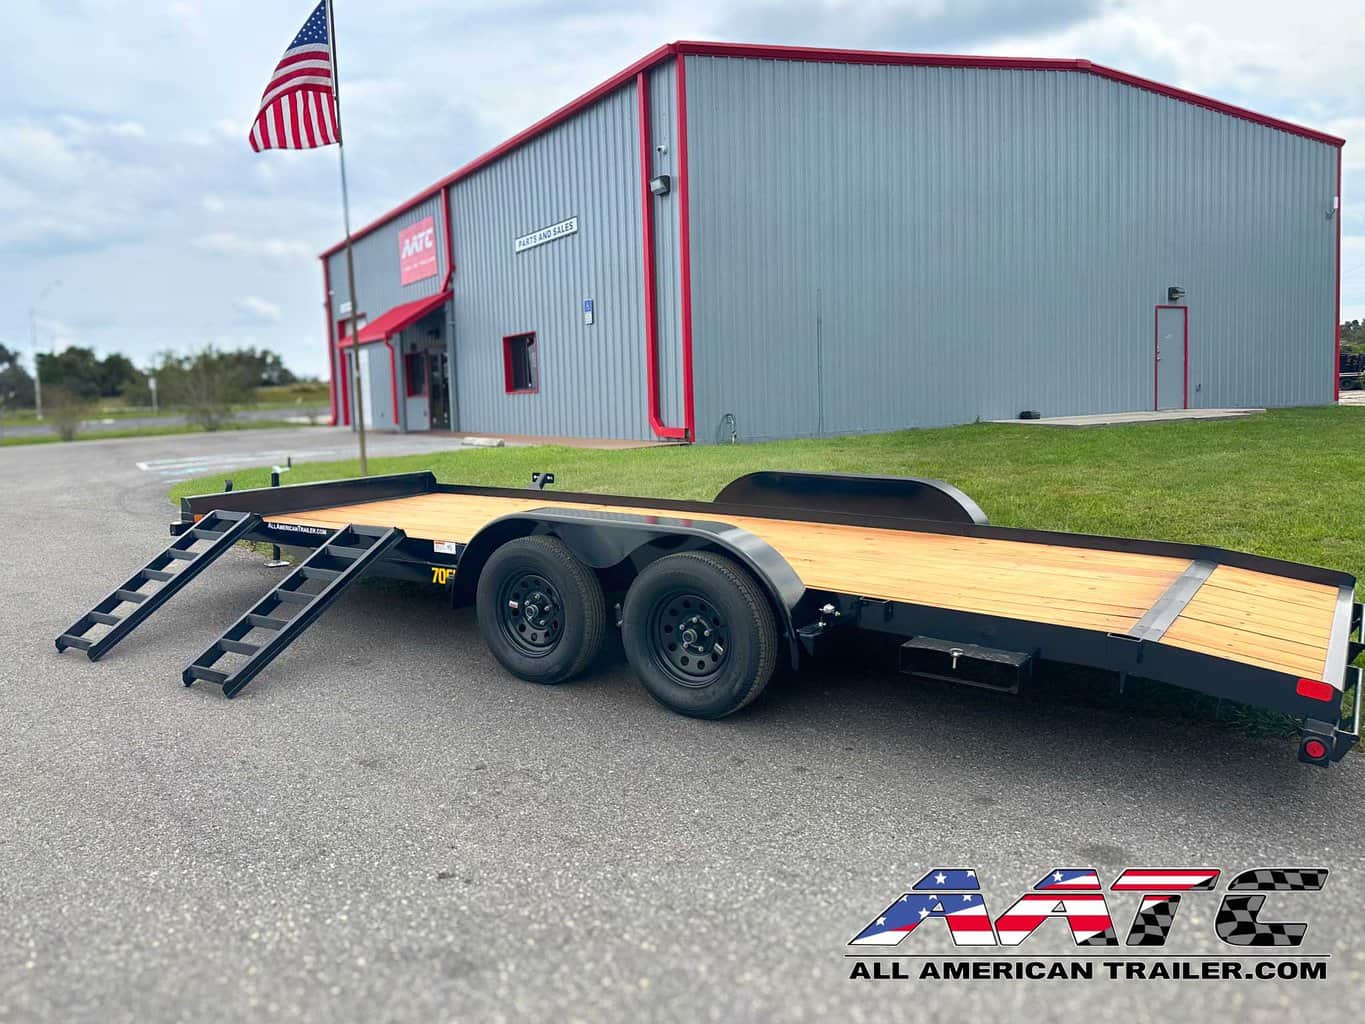 A reliable and versatile 20-foot car hauler trailer from Big Tex, model 70CH. This Big Tex Trailer features a tandem axle, wood deck, and a convenient dovetail design. With a 7000 GVWR, electric brakes, and a load capacity of 4940 lbs, it's a dependable choice for various utility and car hauling needs. The bumper pull tongue type makes it easy to tow and transport your vehicles.